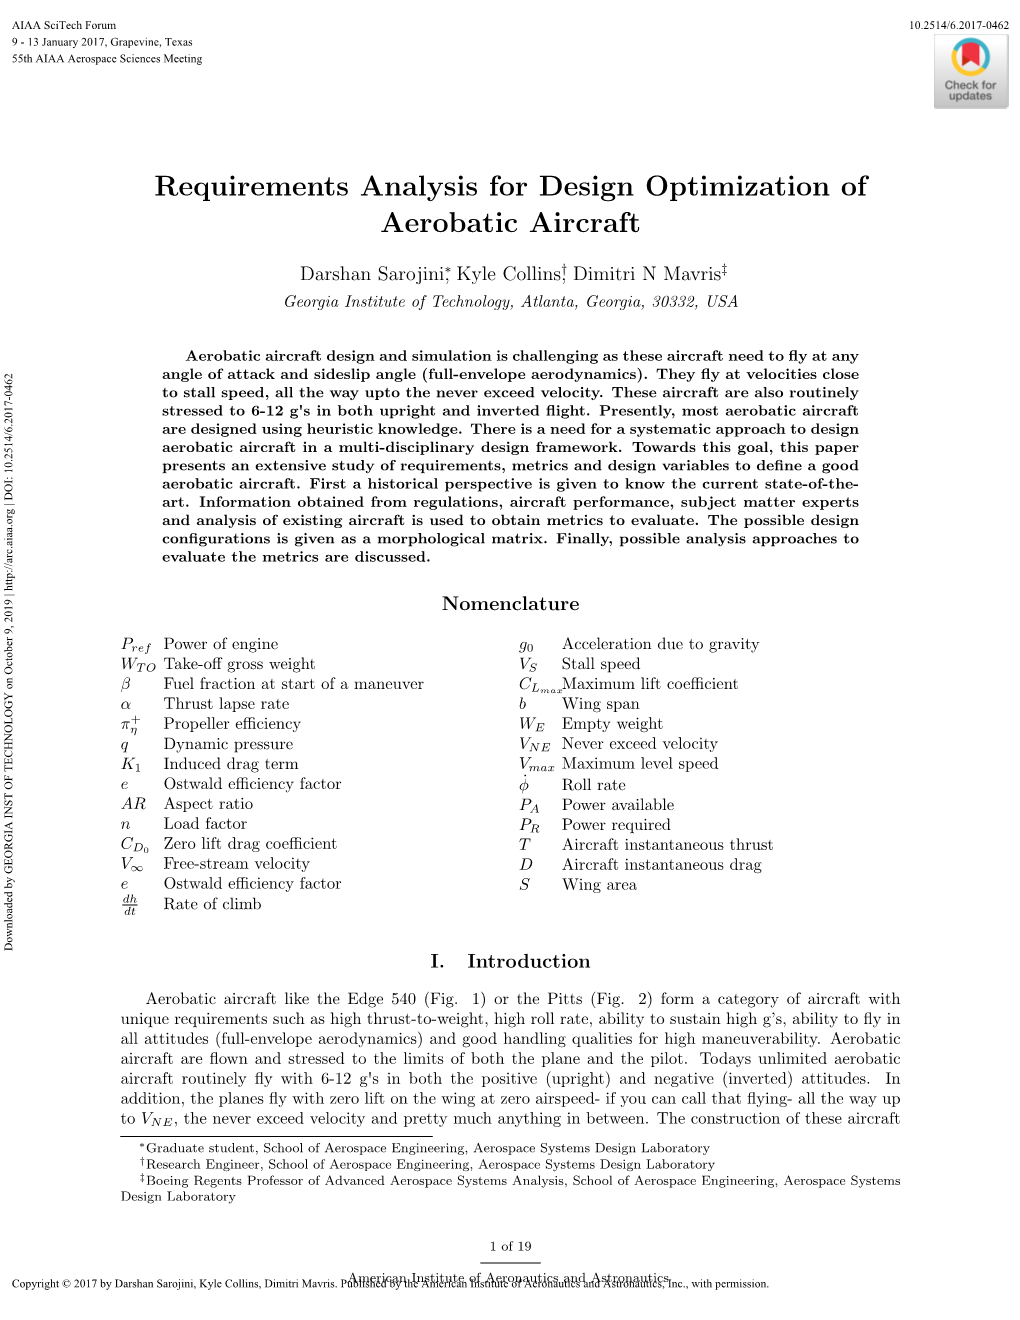 Requirements Analysis for Design Optimization of Aerobatic Aircraft